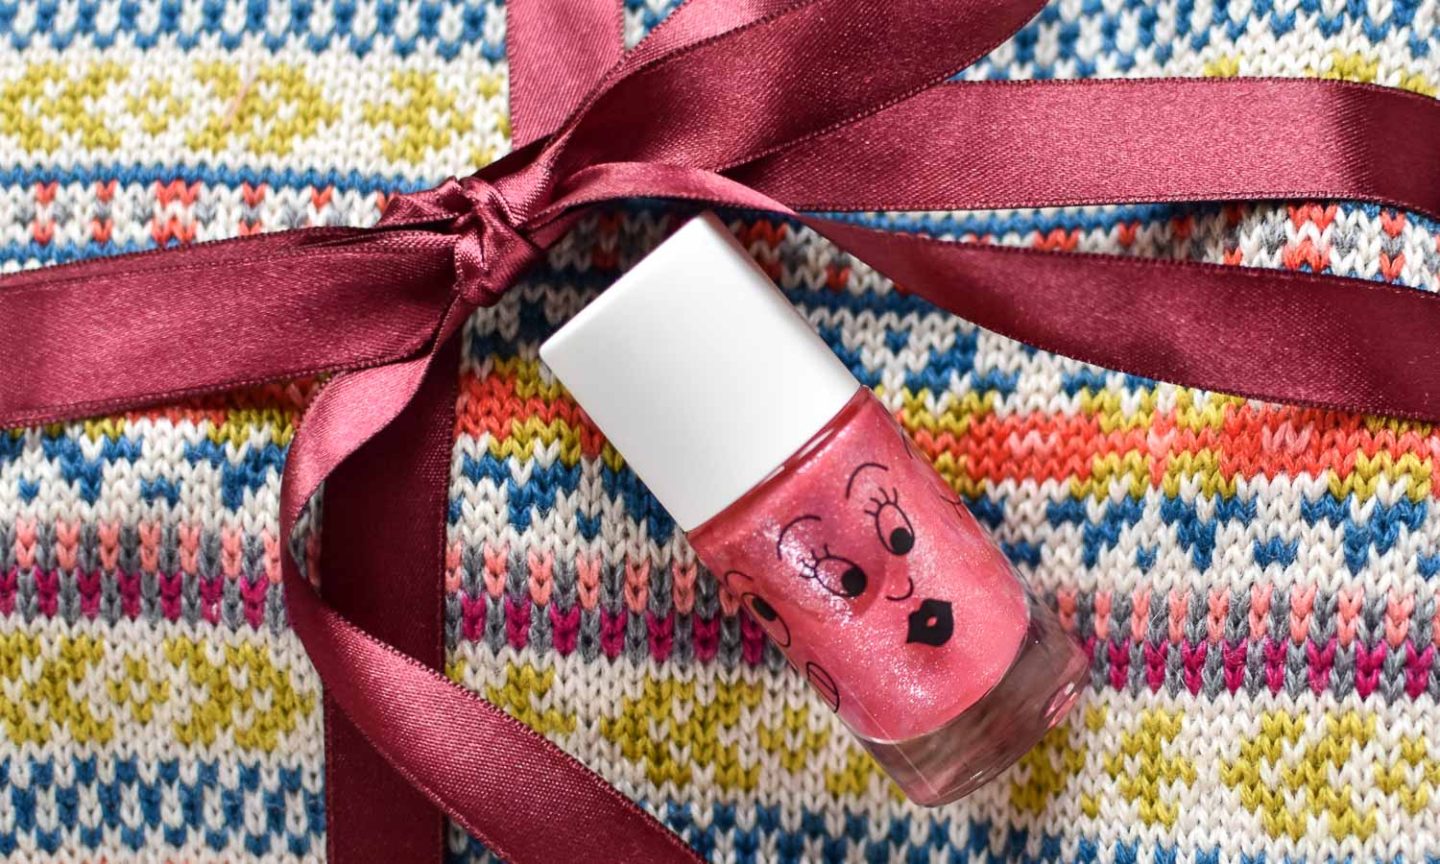 Pink nail varnish from nailmatic, Ethical Christmas Gifts for Kids